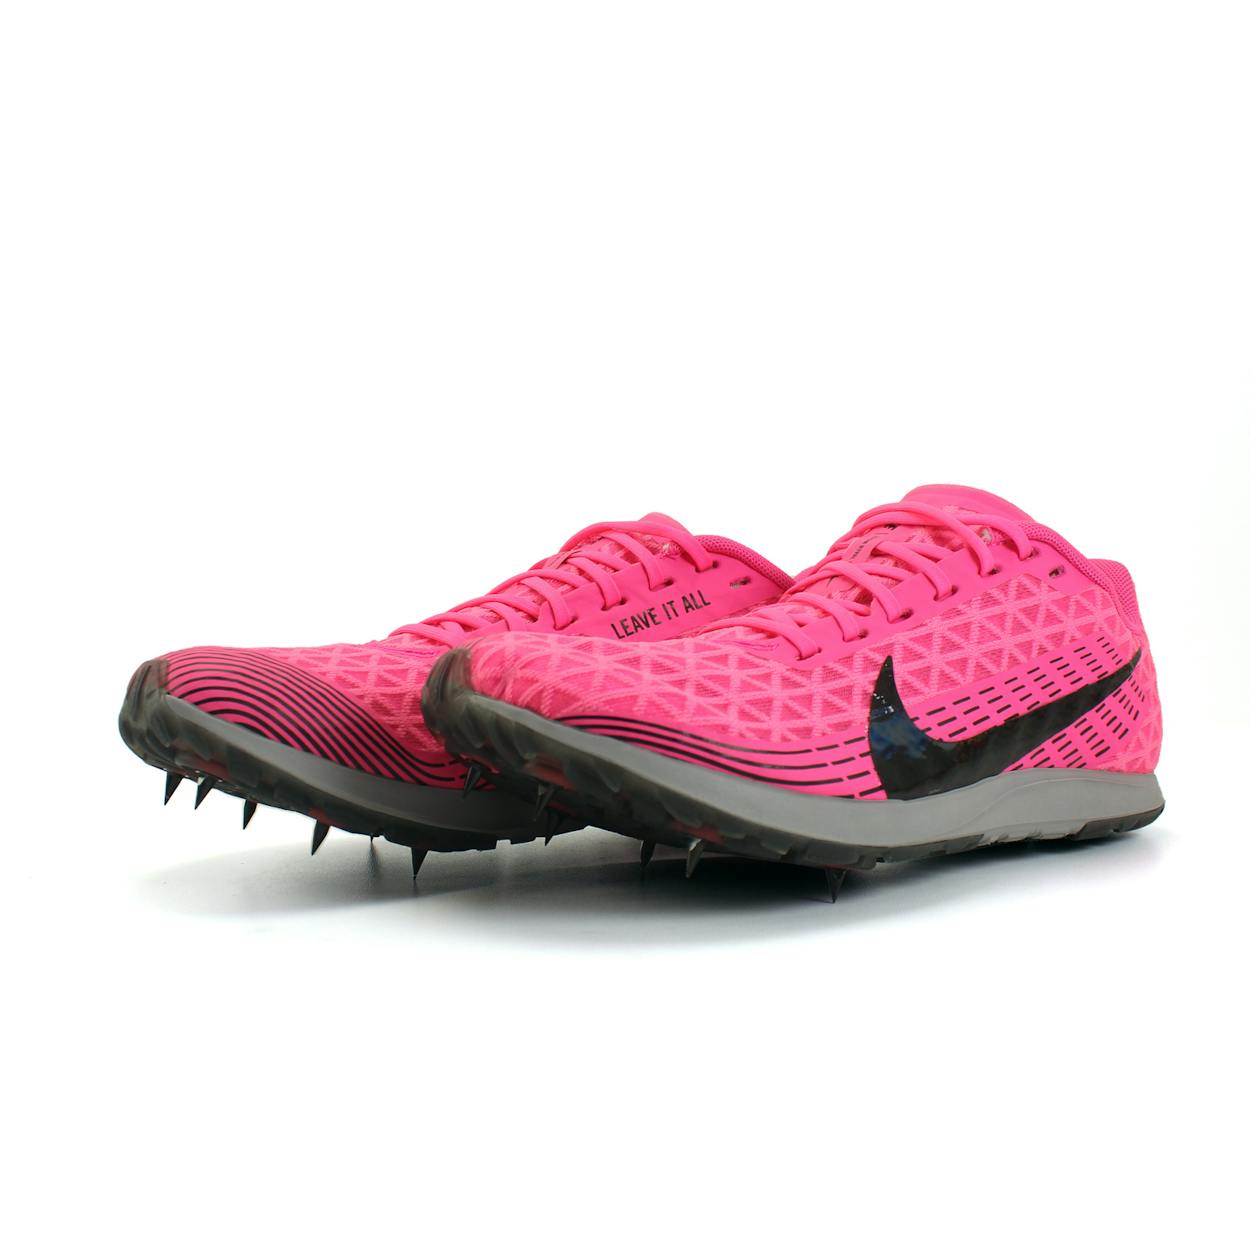 construction Tropical remaining Nike Zoom Rival XC 2019 Spikes Unisex Rosa